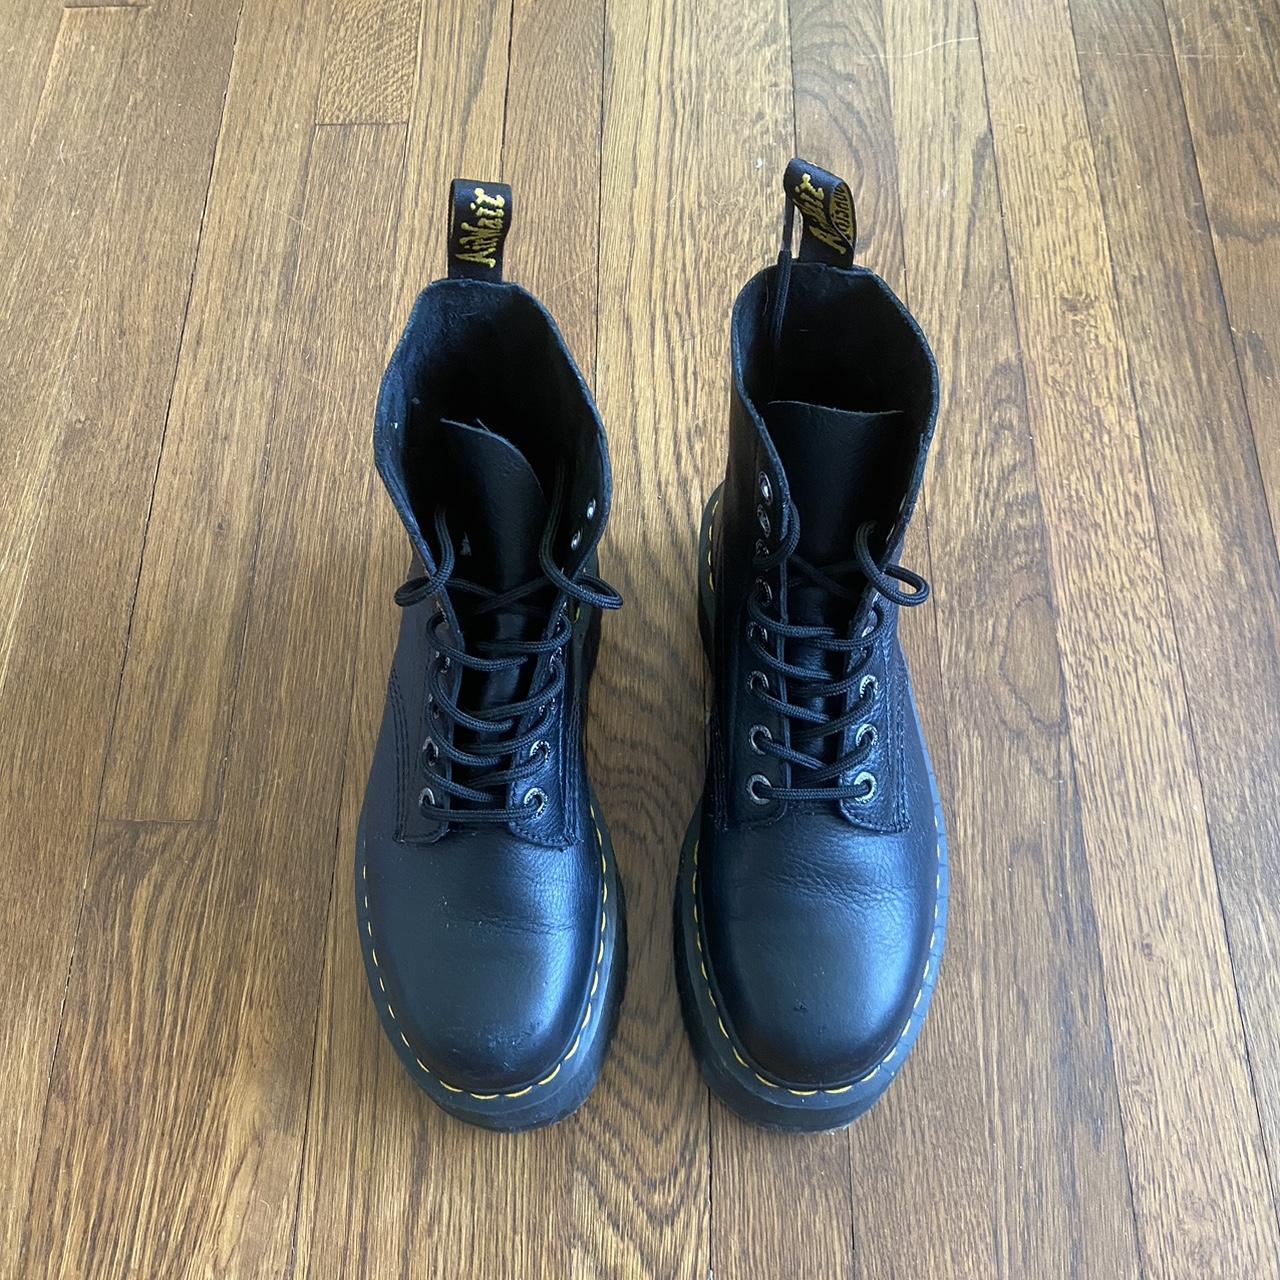 Dr. Martens Women's Black and Yellow Boots (3)